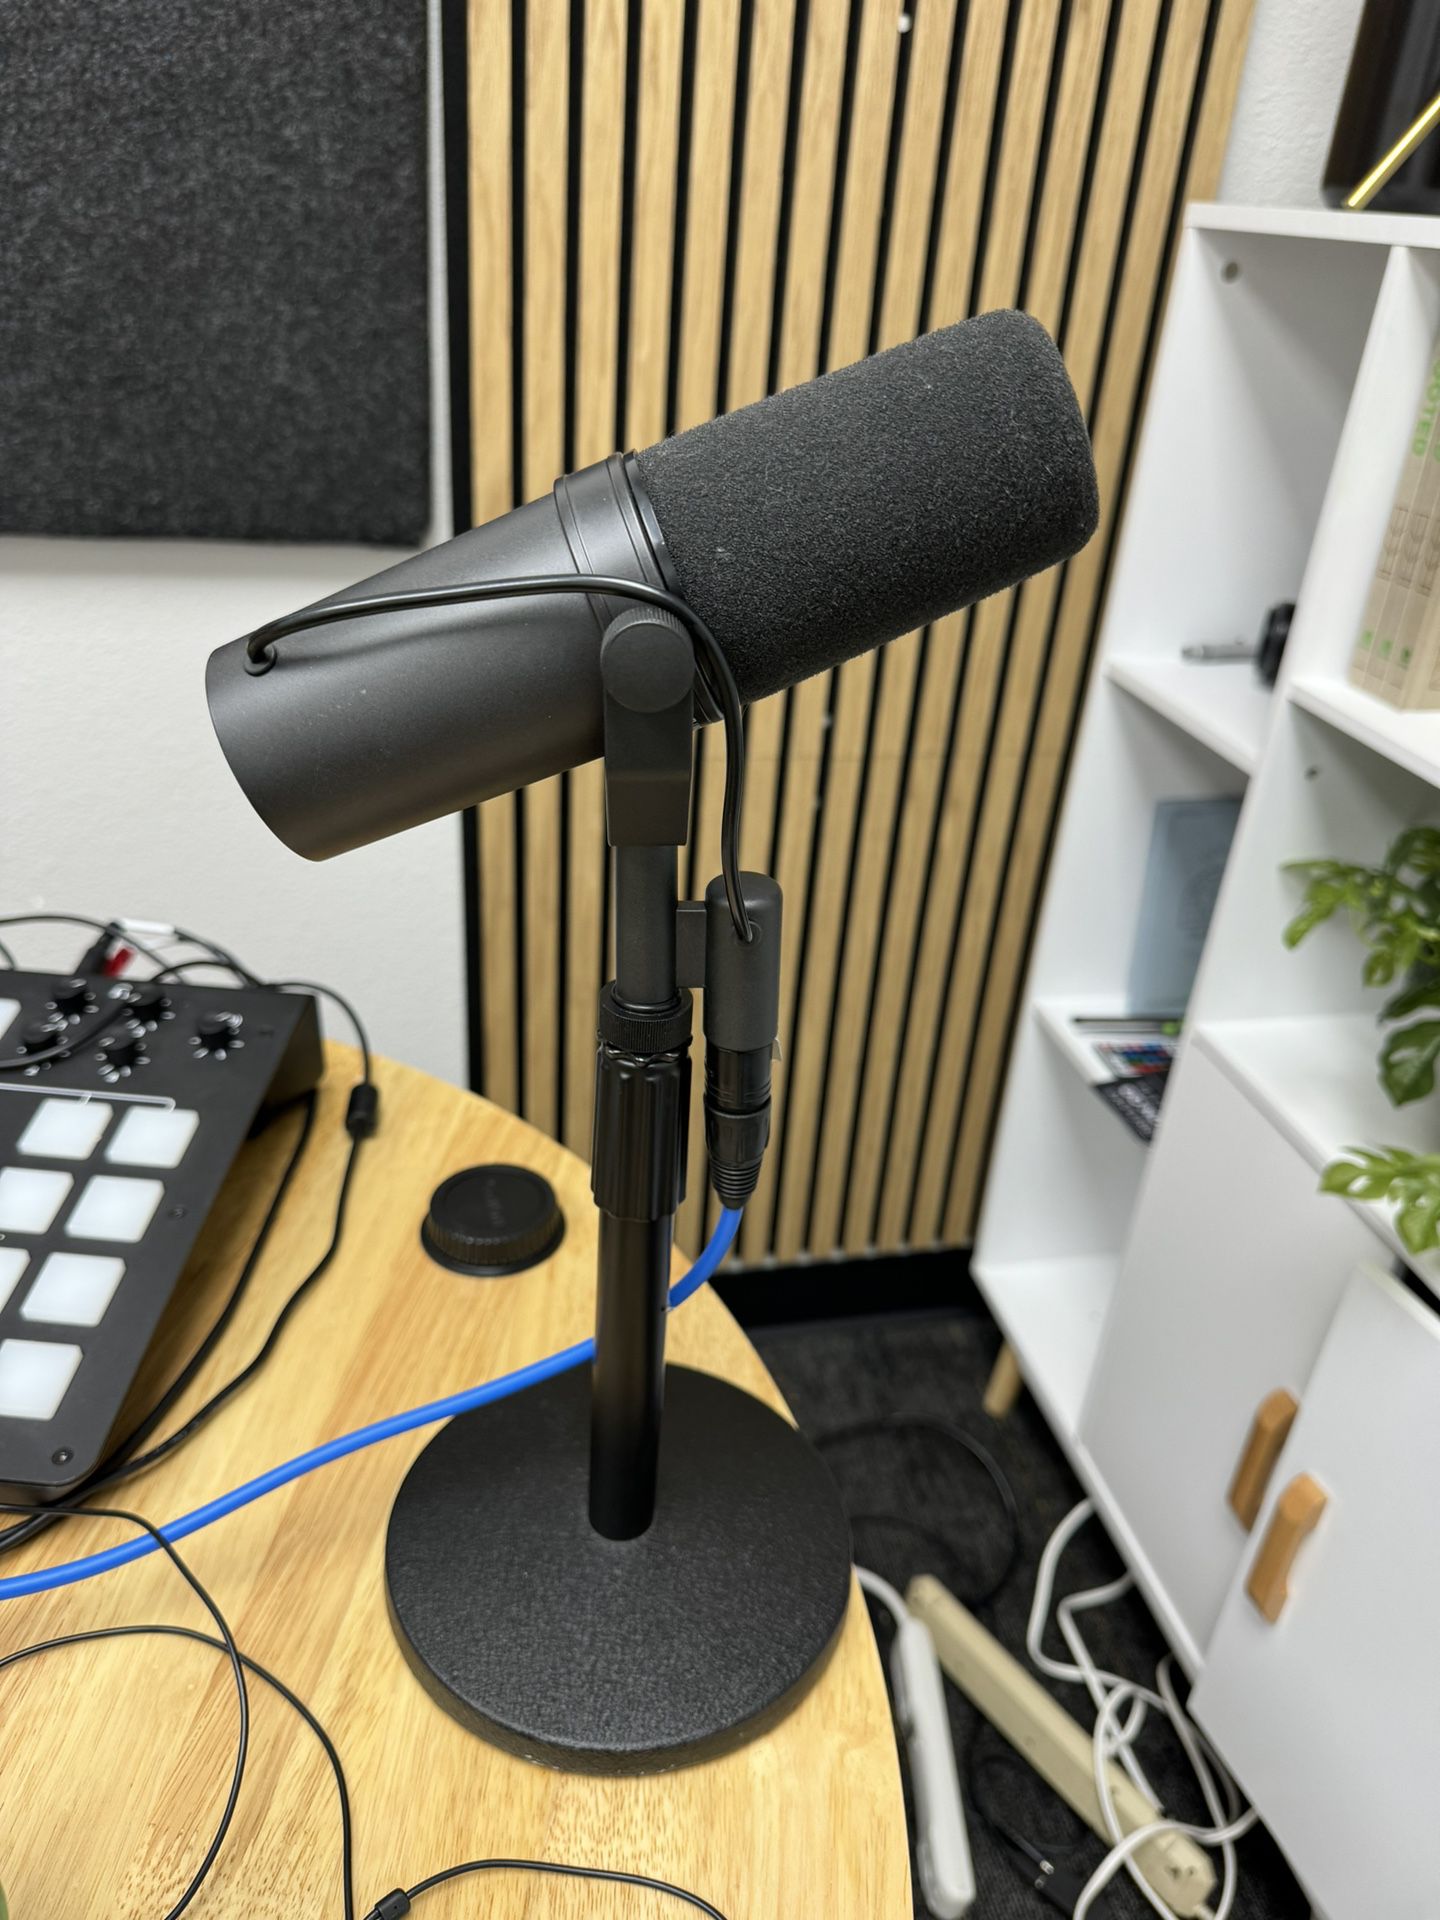 Sm7b Microphone For Recording And Podcasting 